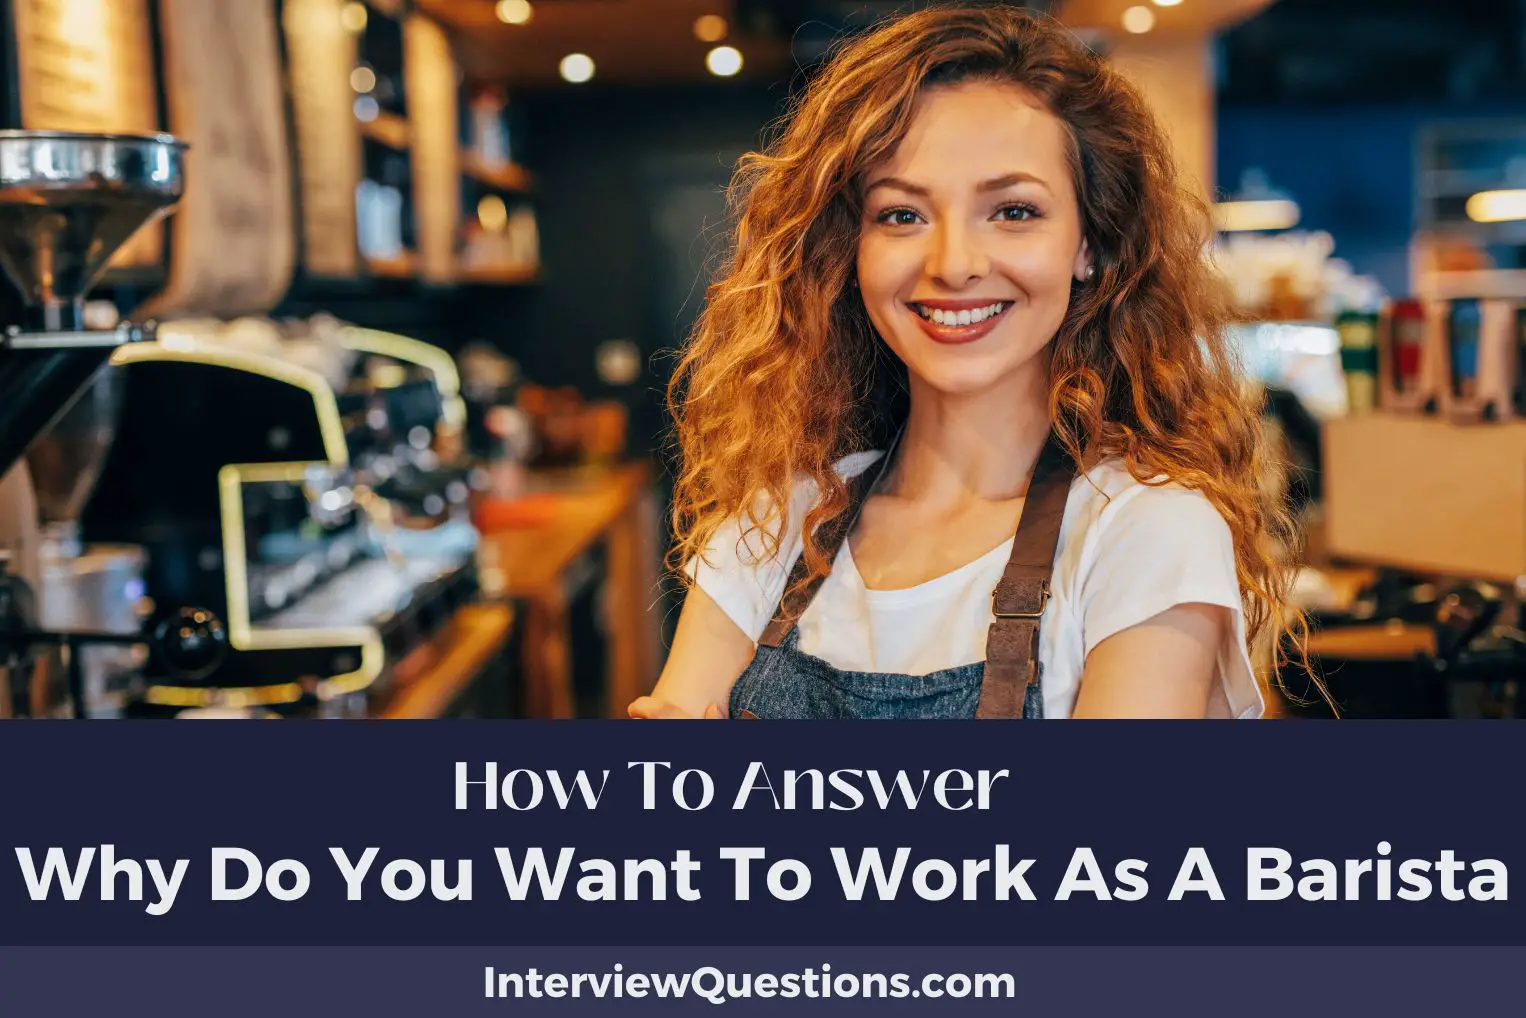 Why Do You Want To Work As A Barista